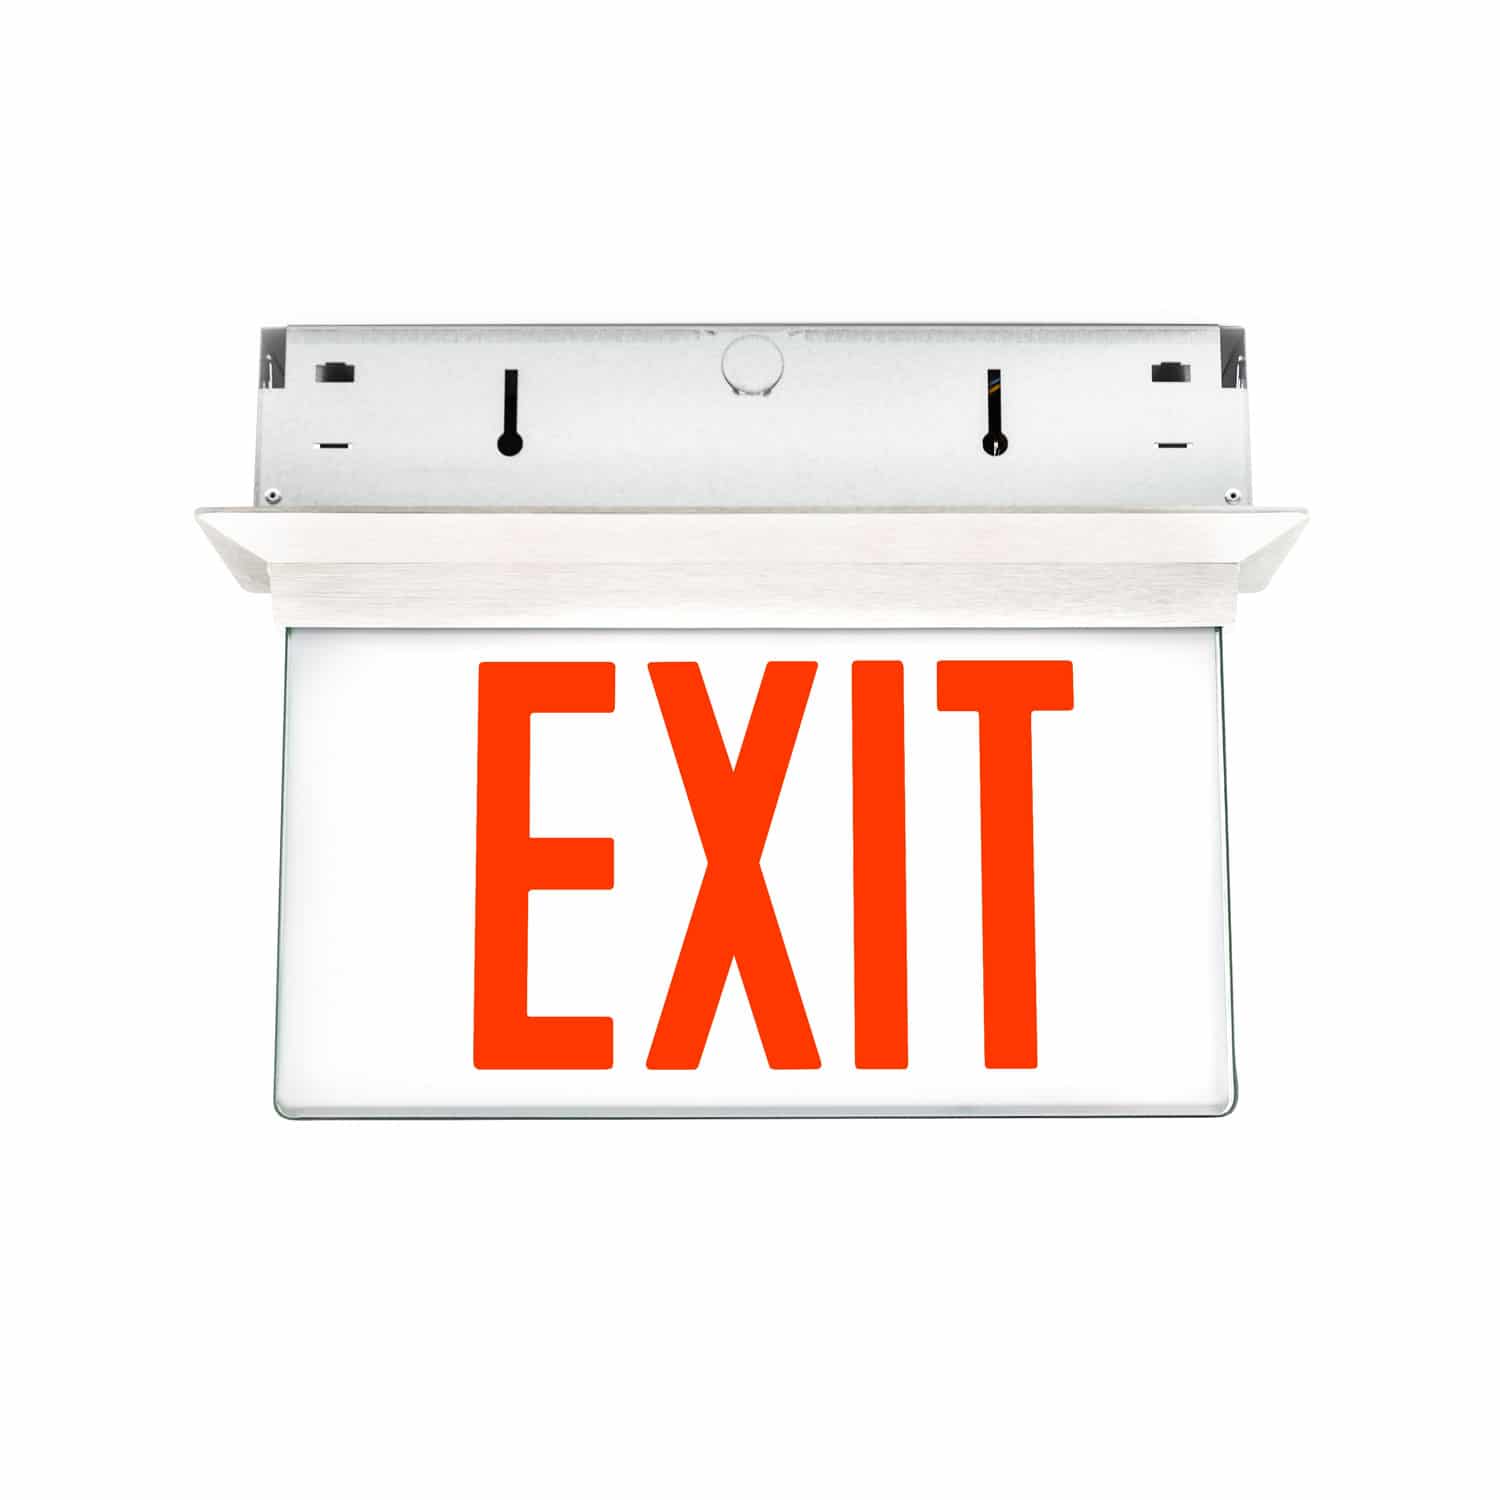 Remote Capable, Edge-Lit Master Exit Sign that is 4 times brighter than the UL 924 requirement. The Isolite ELTMR.